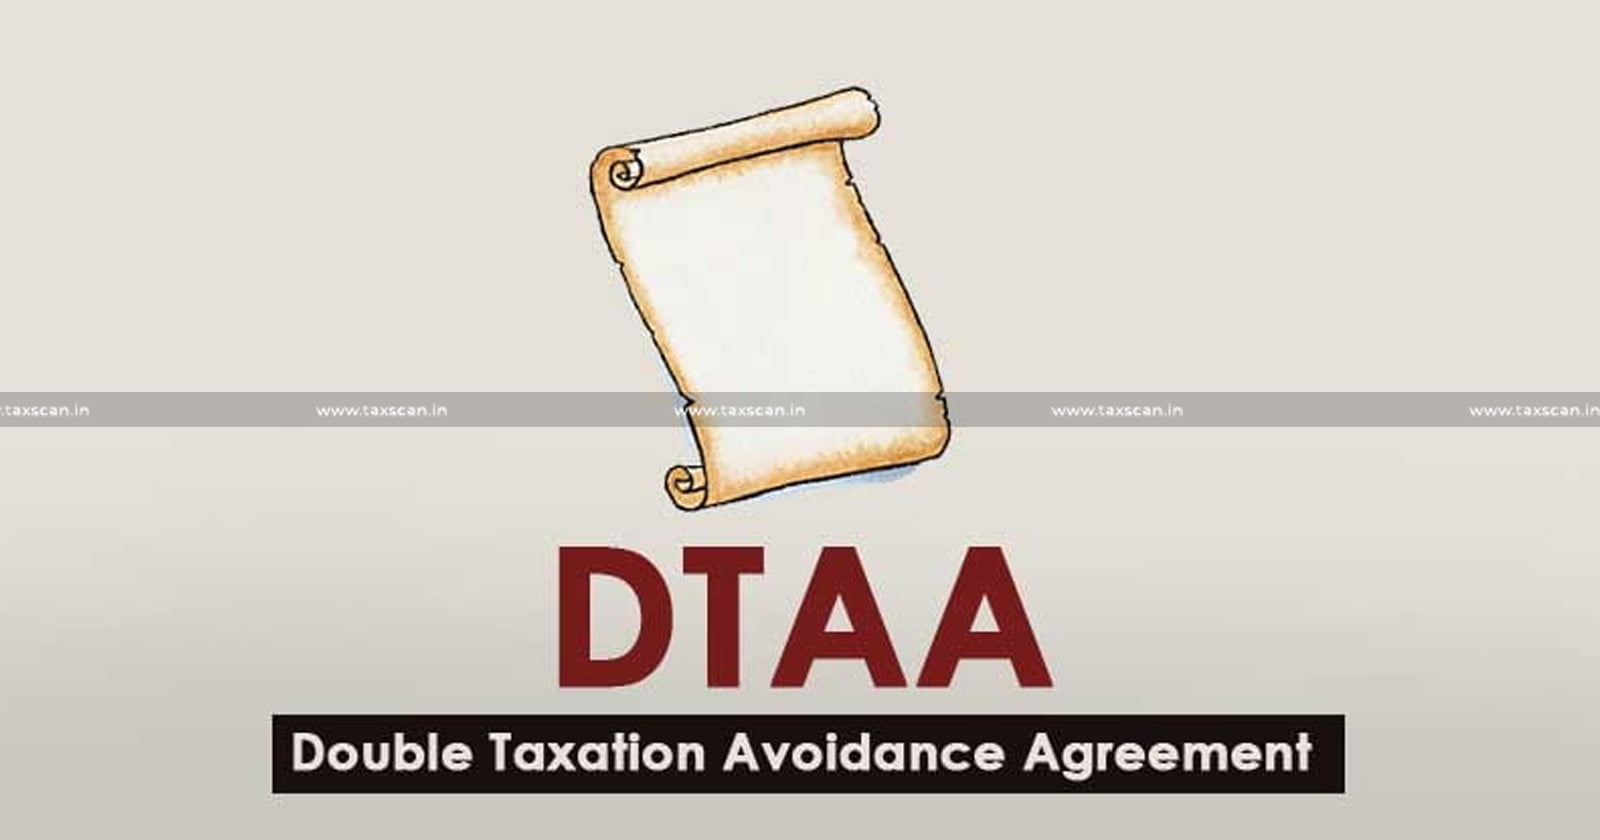 Non-Resident Shareholders - Non-Resident - Shareholders - Lower Tax Rates - Tax Rate - DTAAs - Dividend Taxation - Taxation - DDT - ITAT - Lower Tax Rates provided by DTAAs - Taxscan